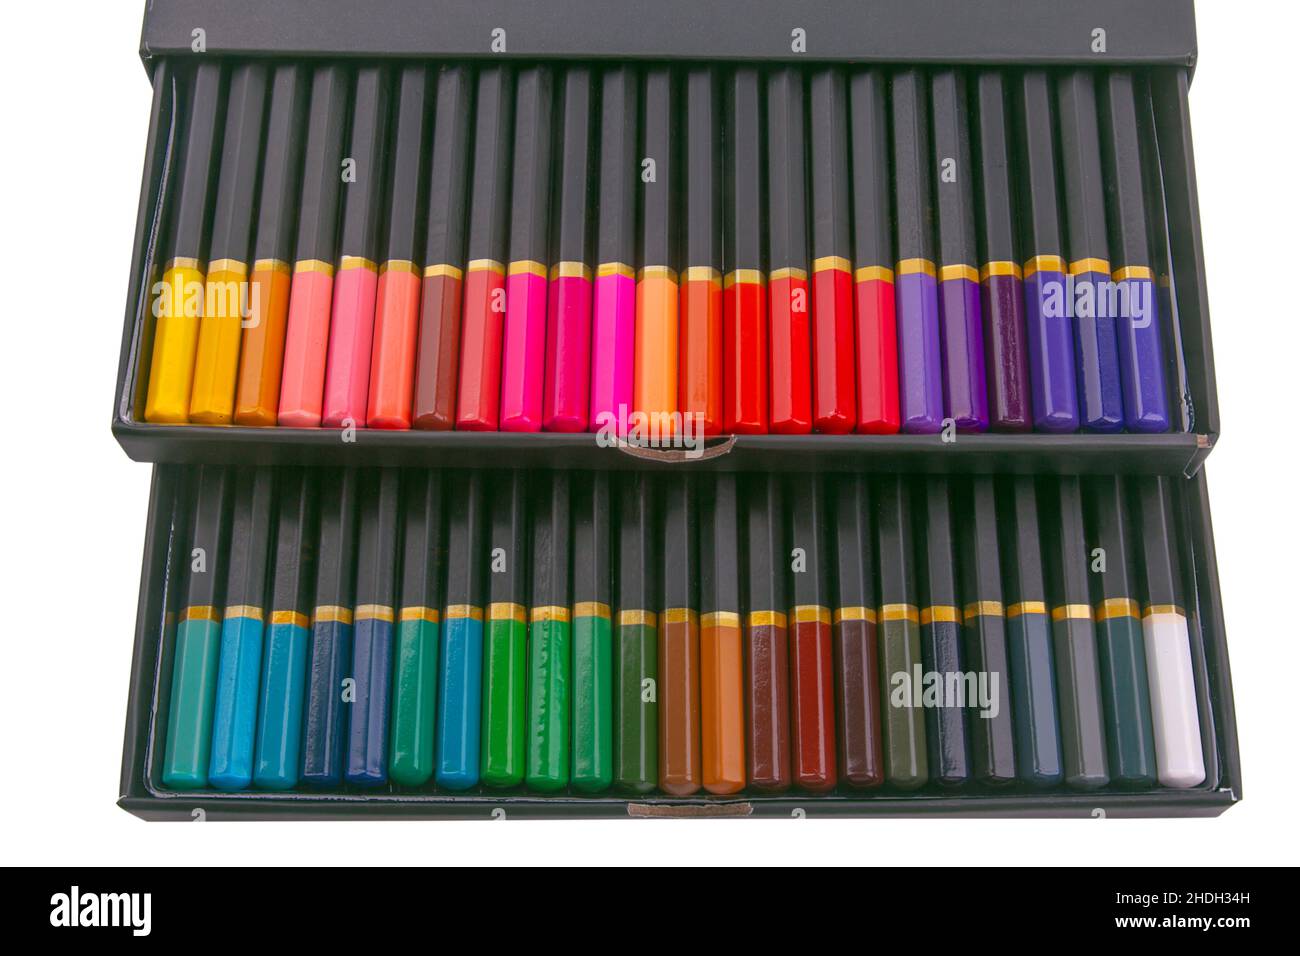 crayon, art supplies  , stationery, crayons, art supplies  s, stationeries Stock Photo